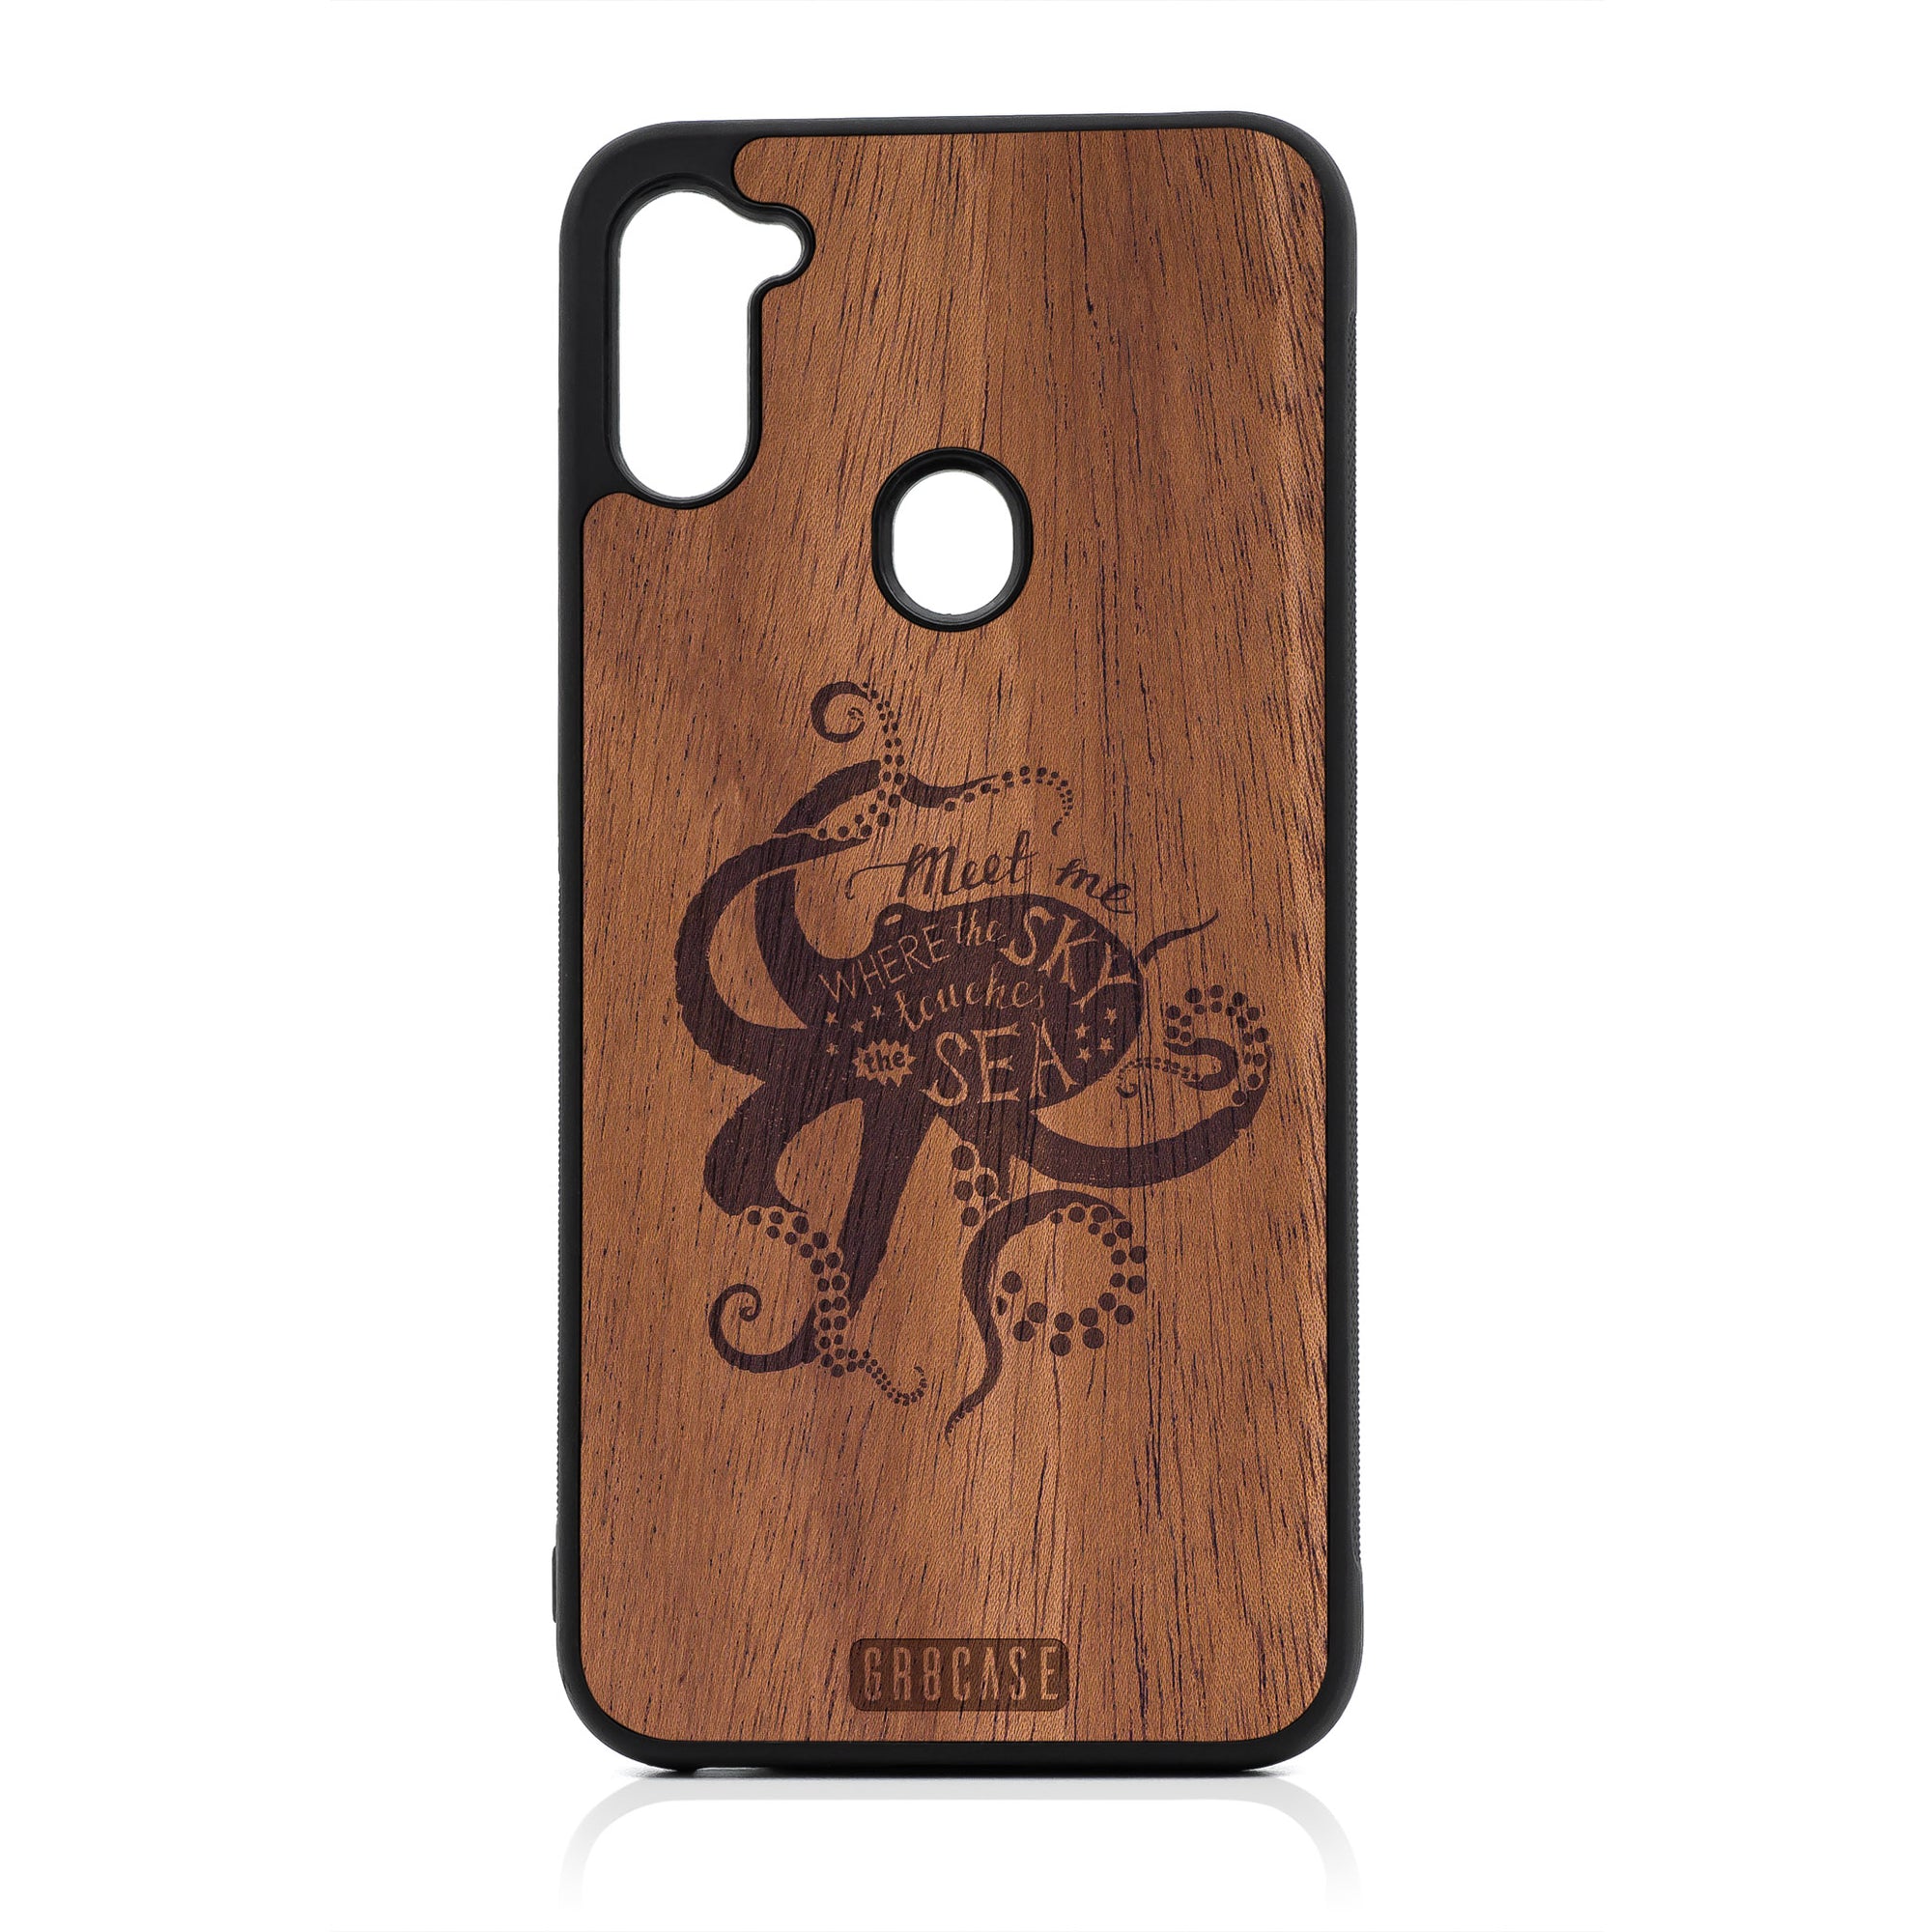 Meet Me Where The Sky Touches The Sea (Octopus) Design Wood Case For Samsung Galaxy A11